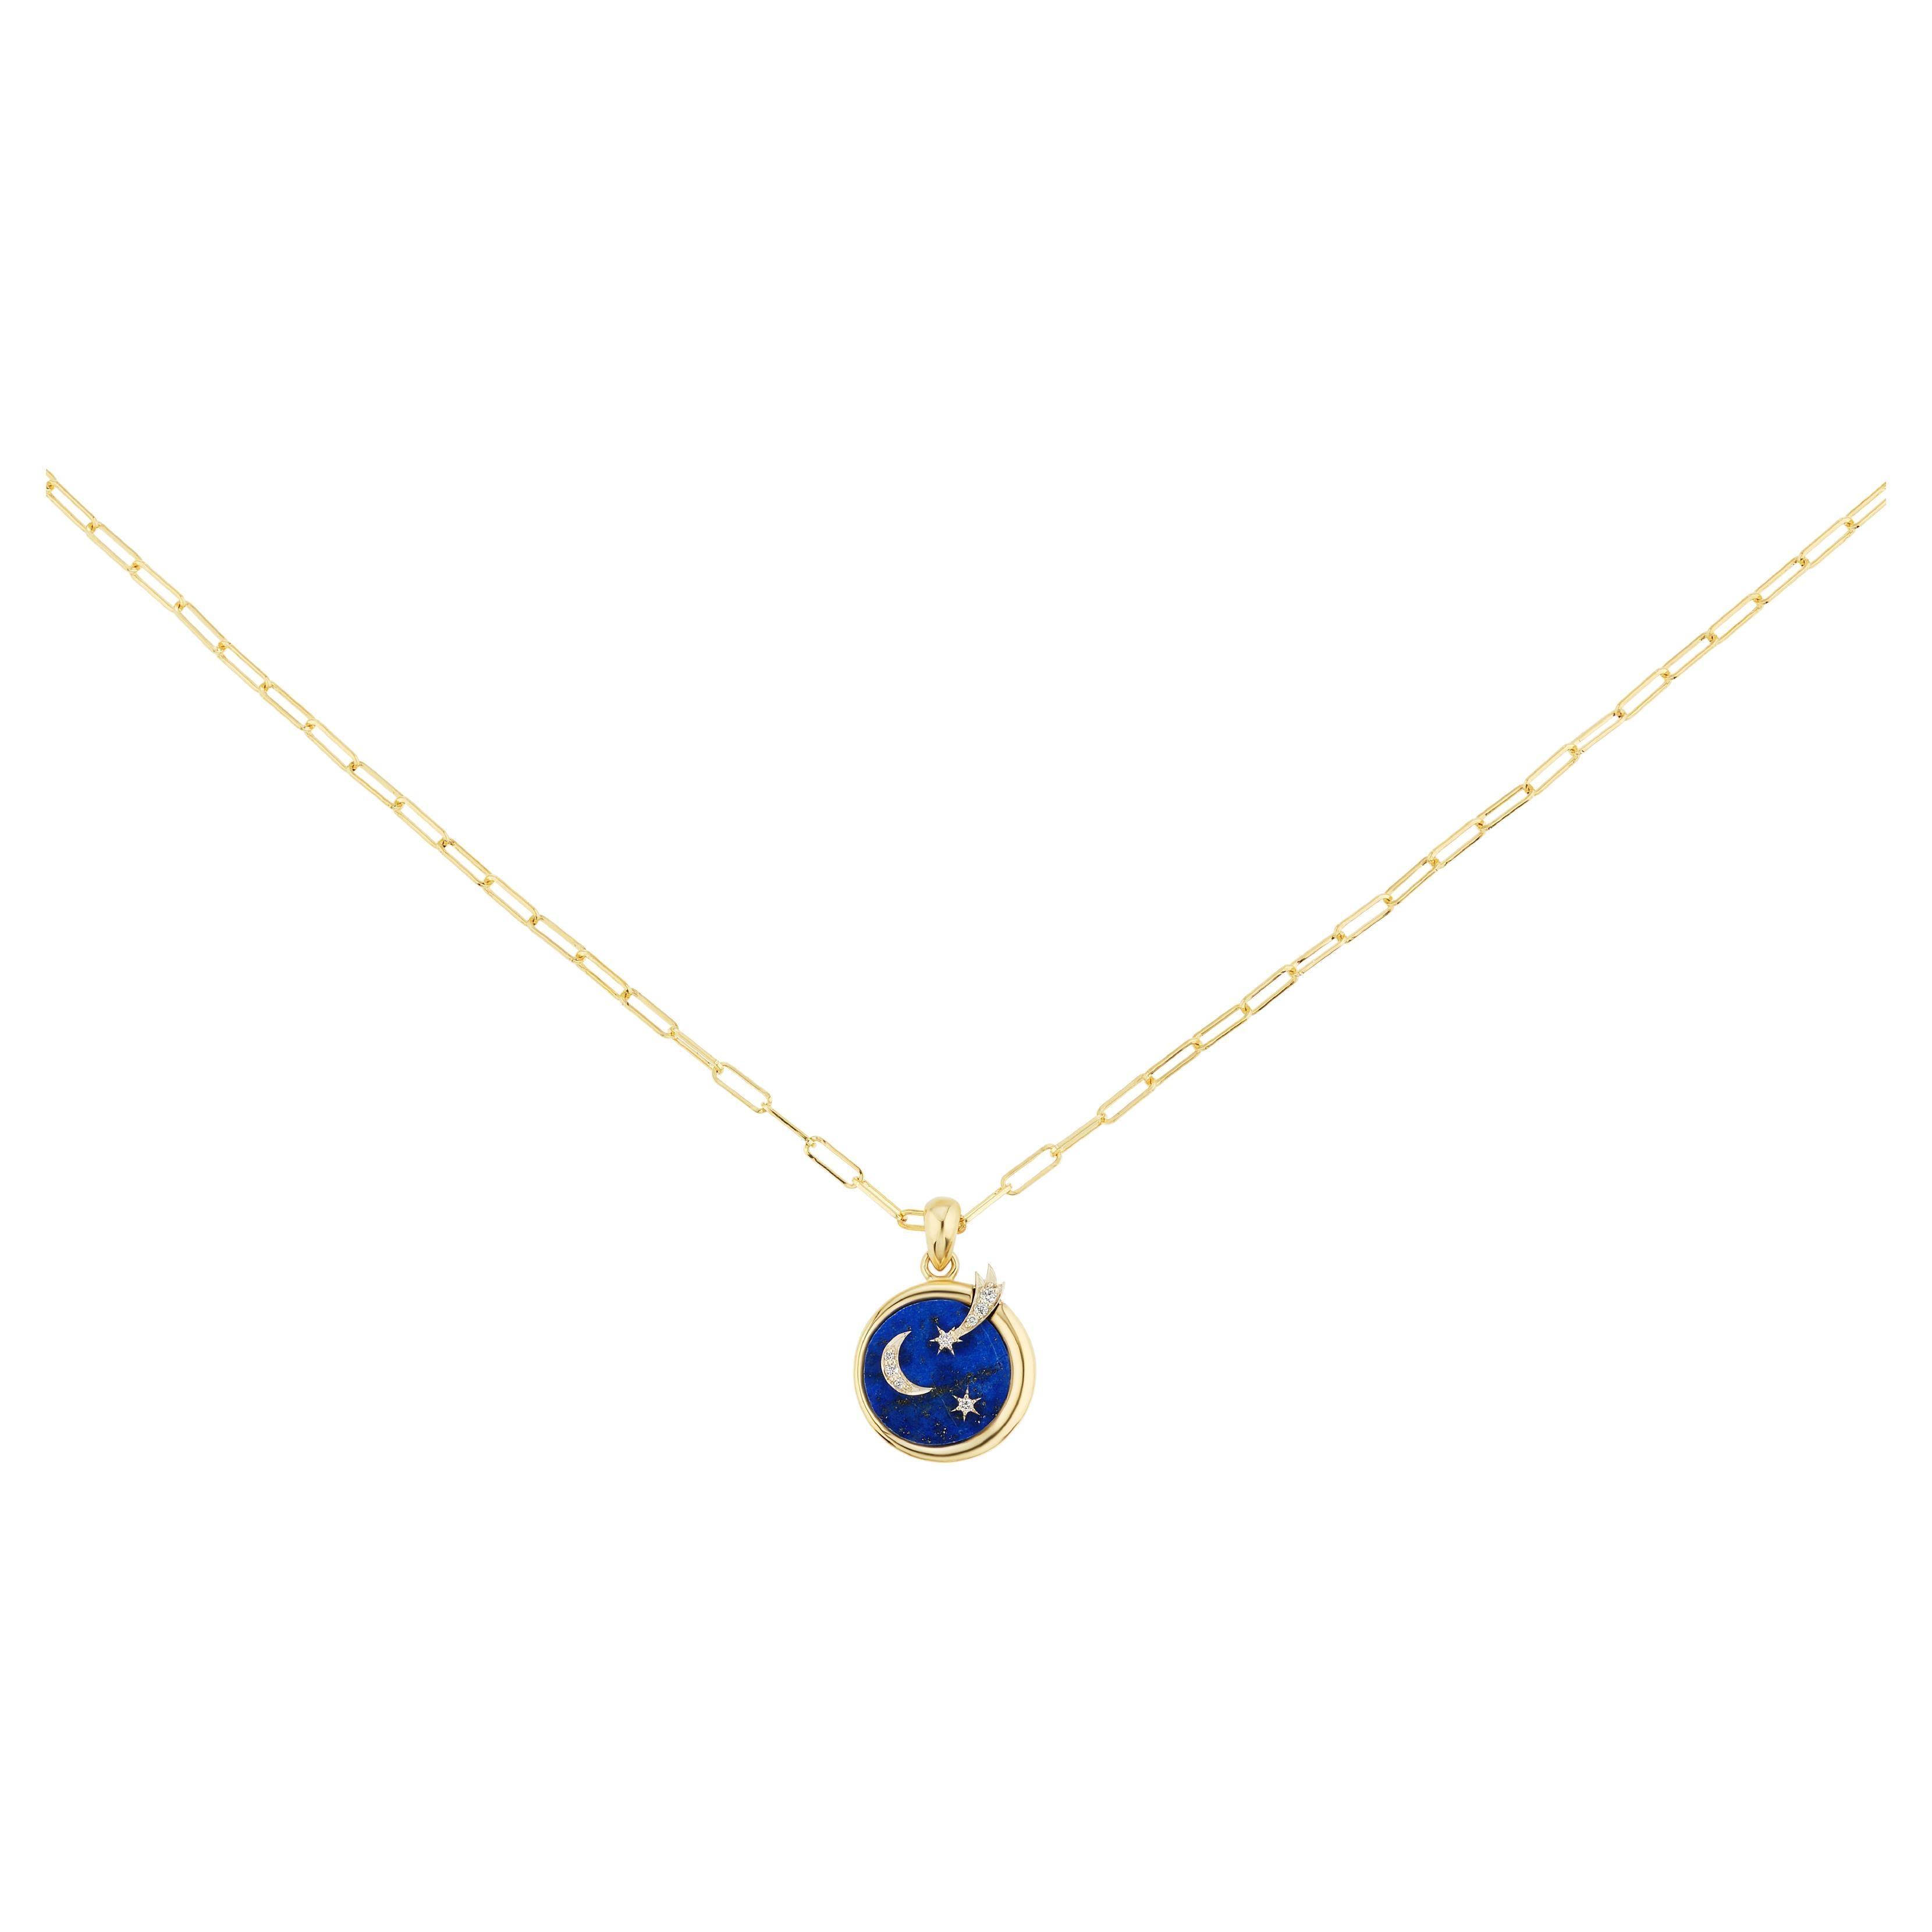 AnaKatarina Elements 'Air' Pendant in 18 Karat Gold, Chilean Lapis, and Diamonds For Sale